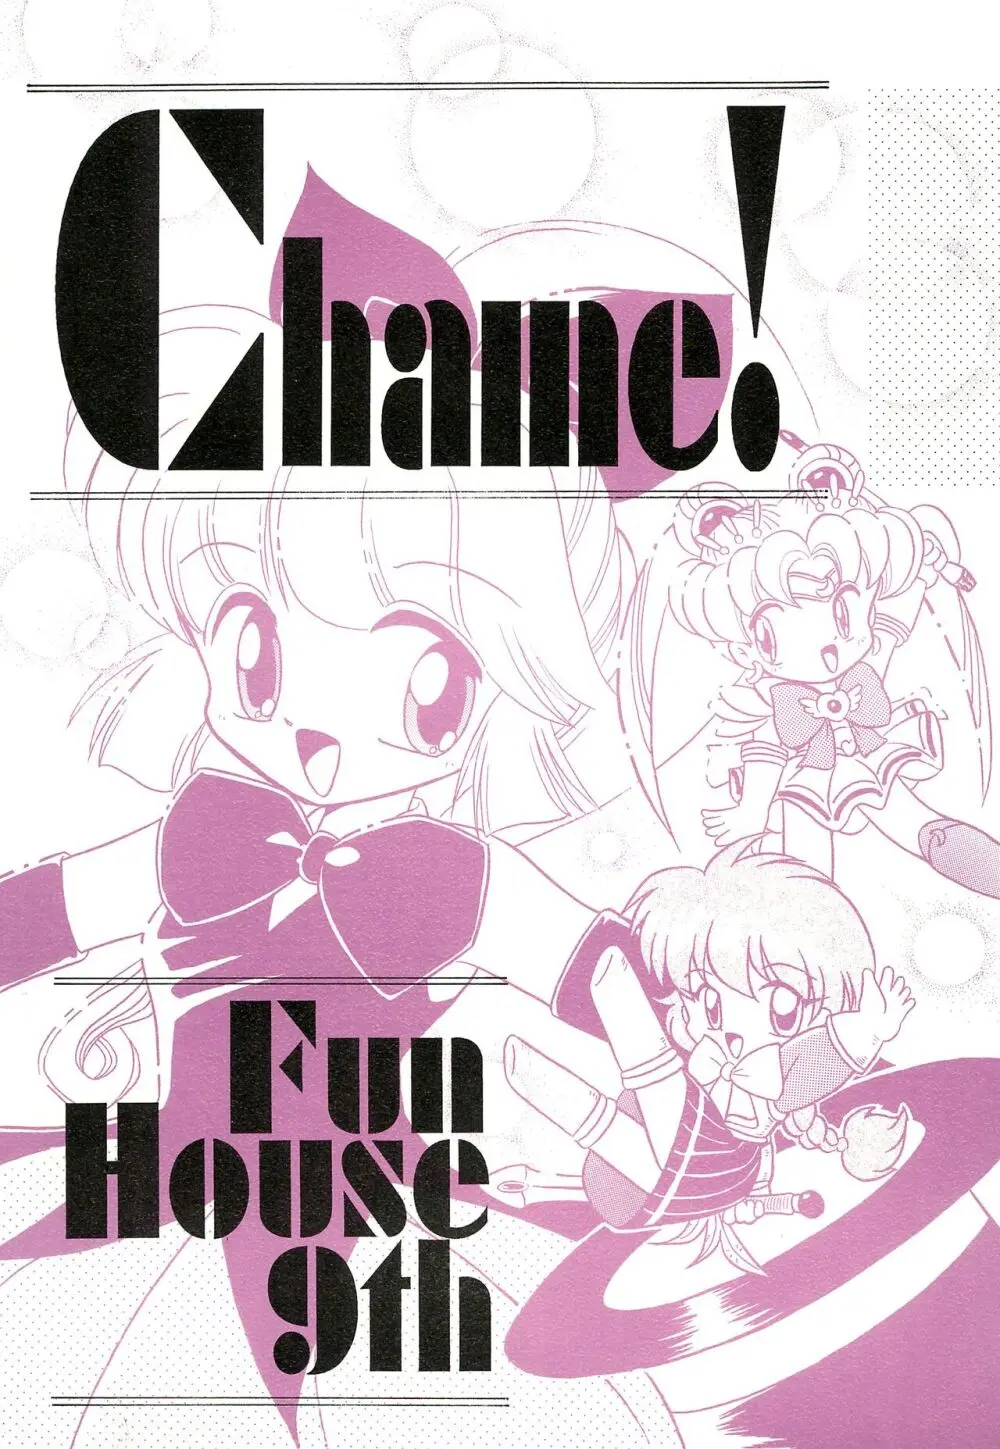 Fun House 9th Chame! - page1